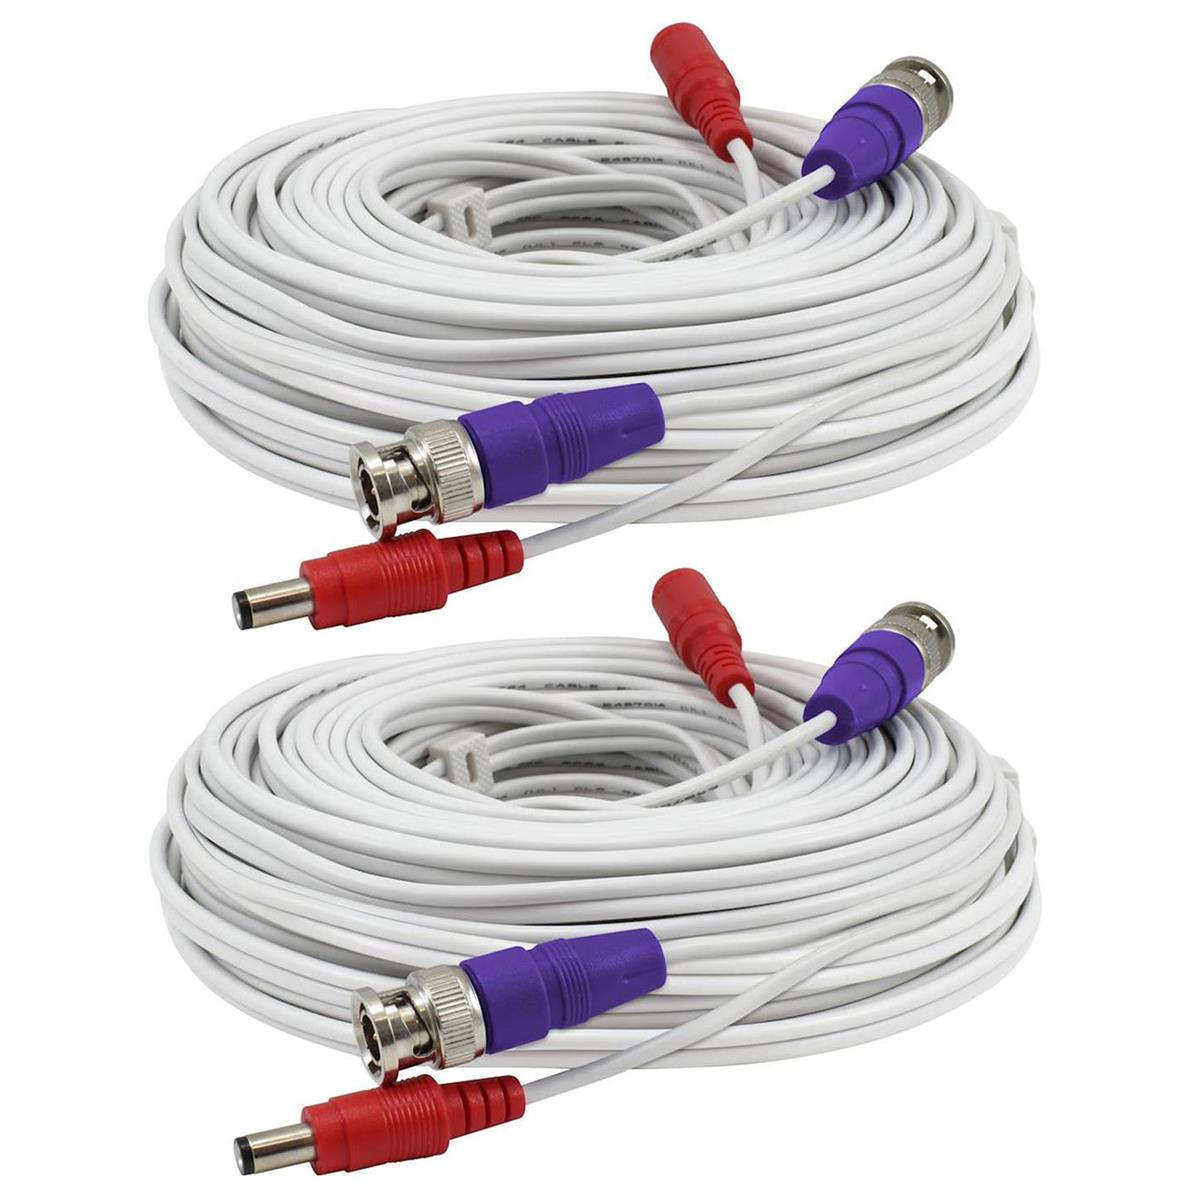 

Swann 2 Pack BNC Security Extension Cable, 50', White